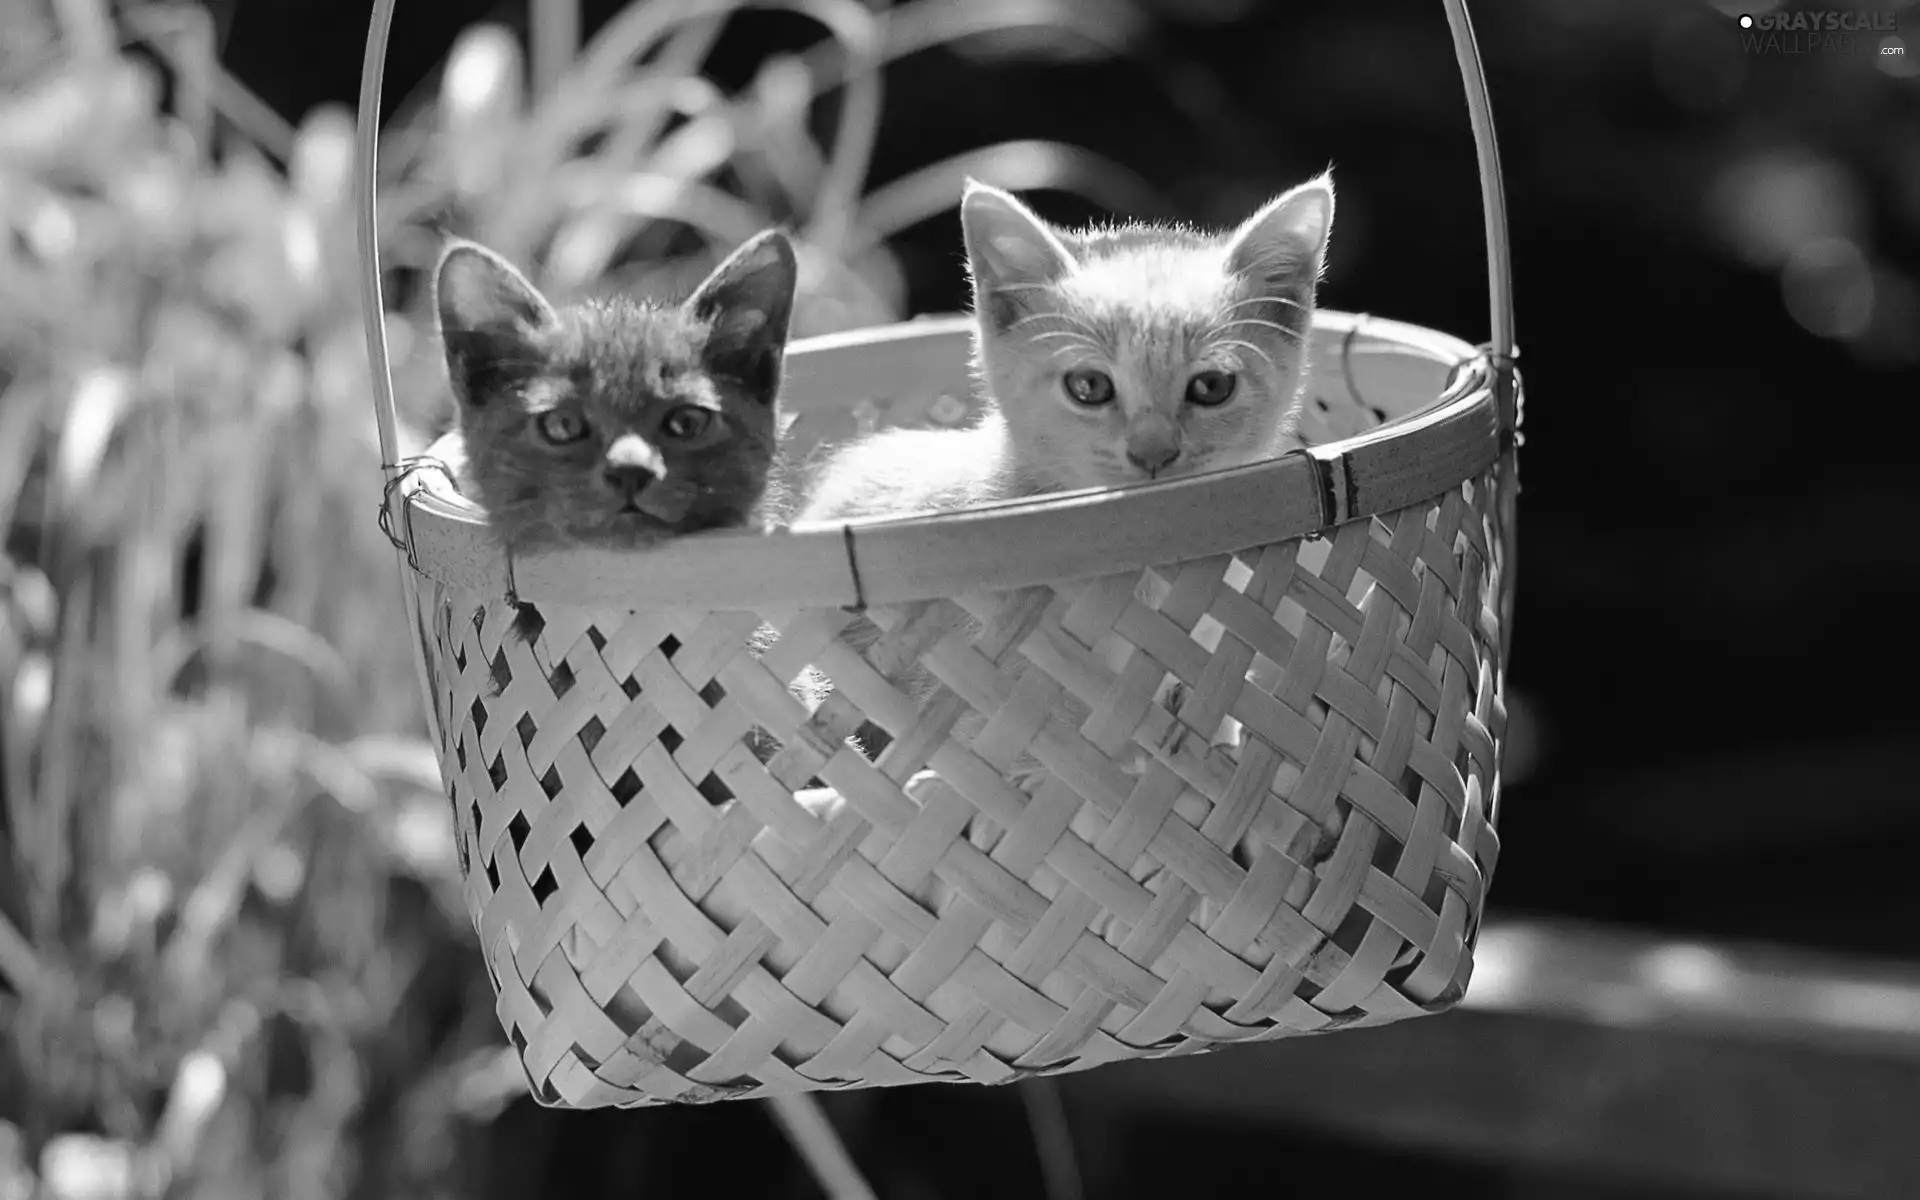 Two cars, ##, basket, puss